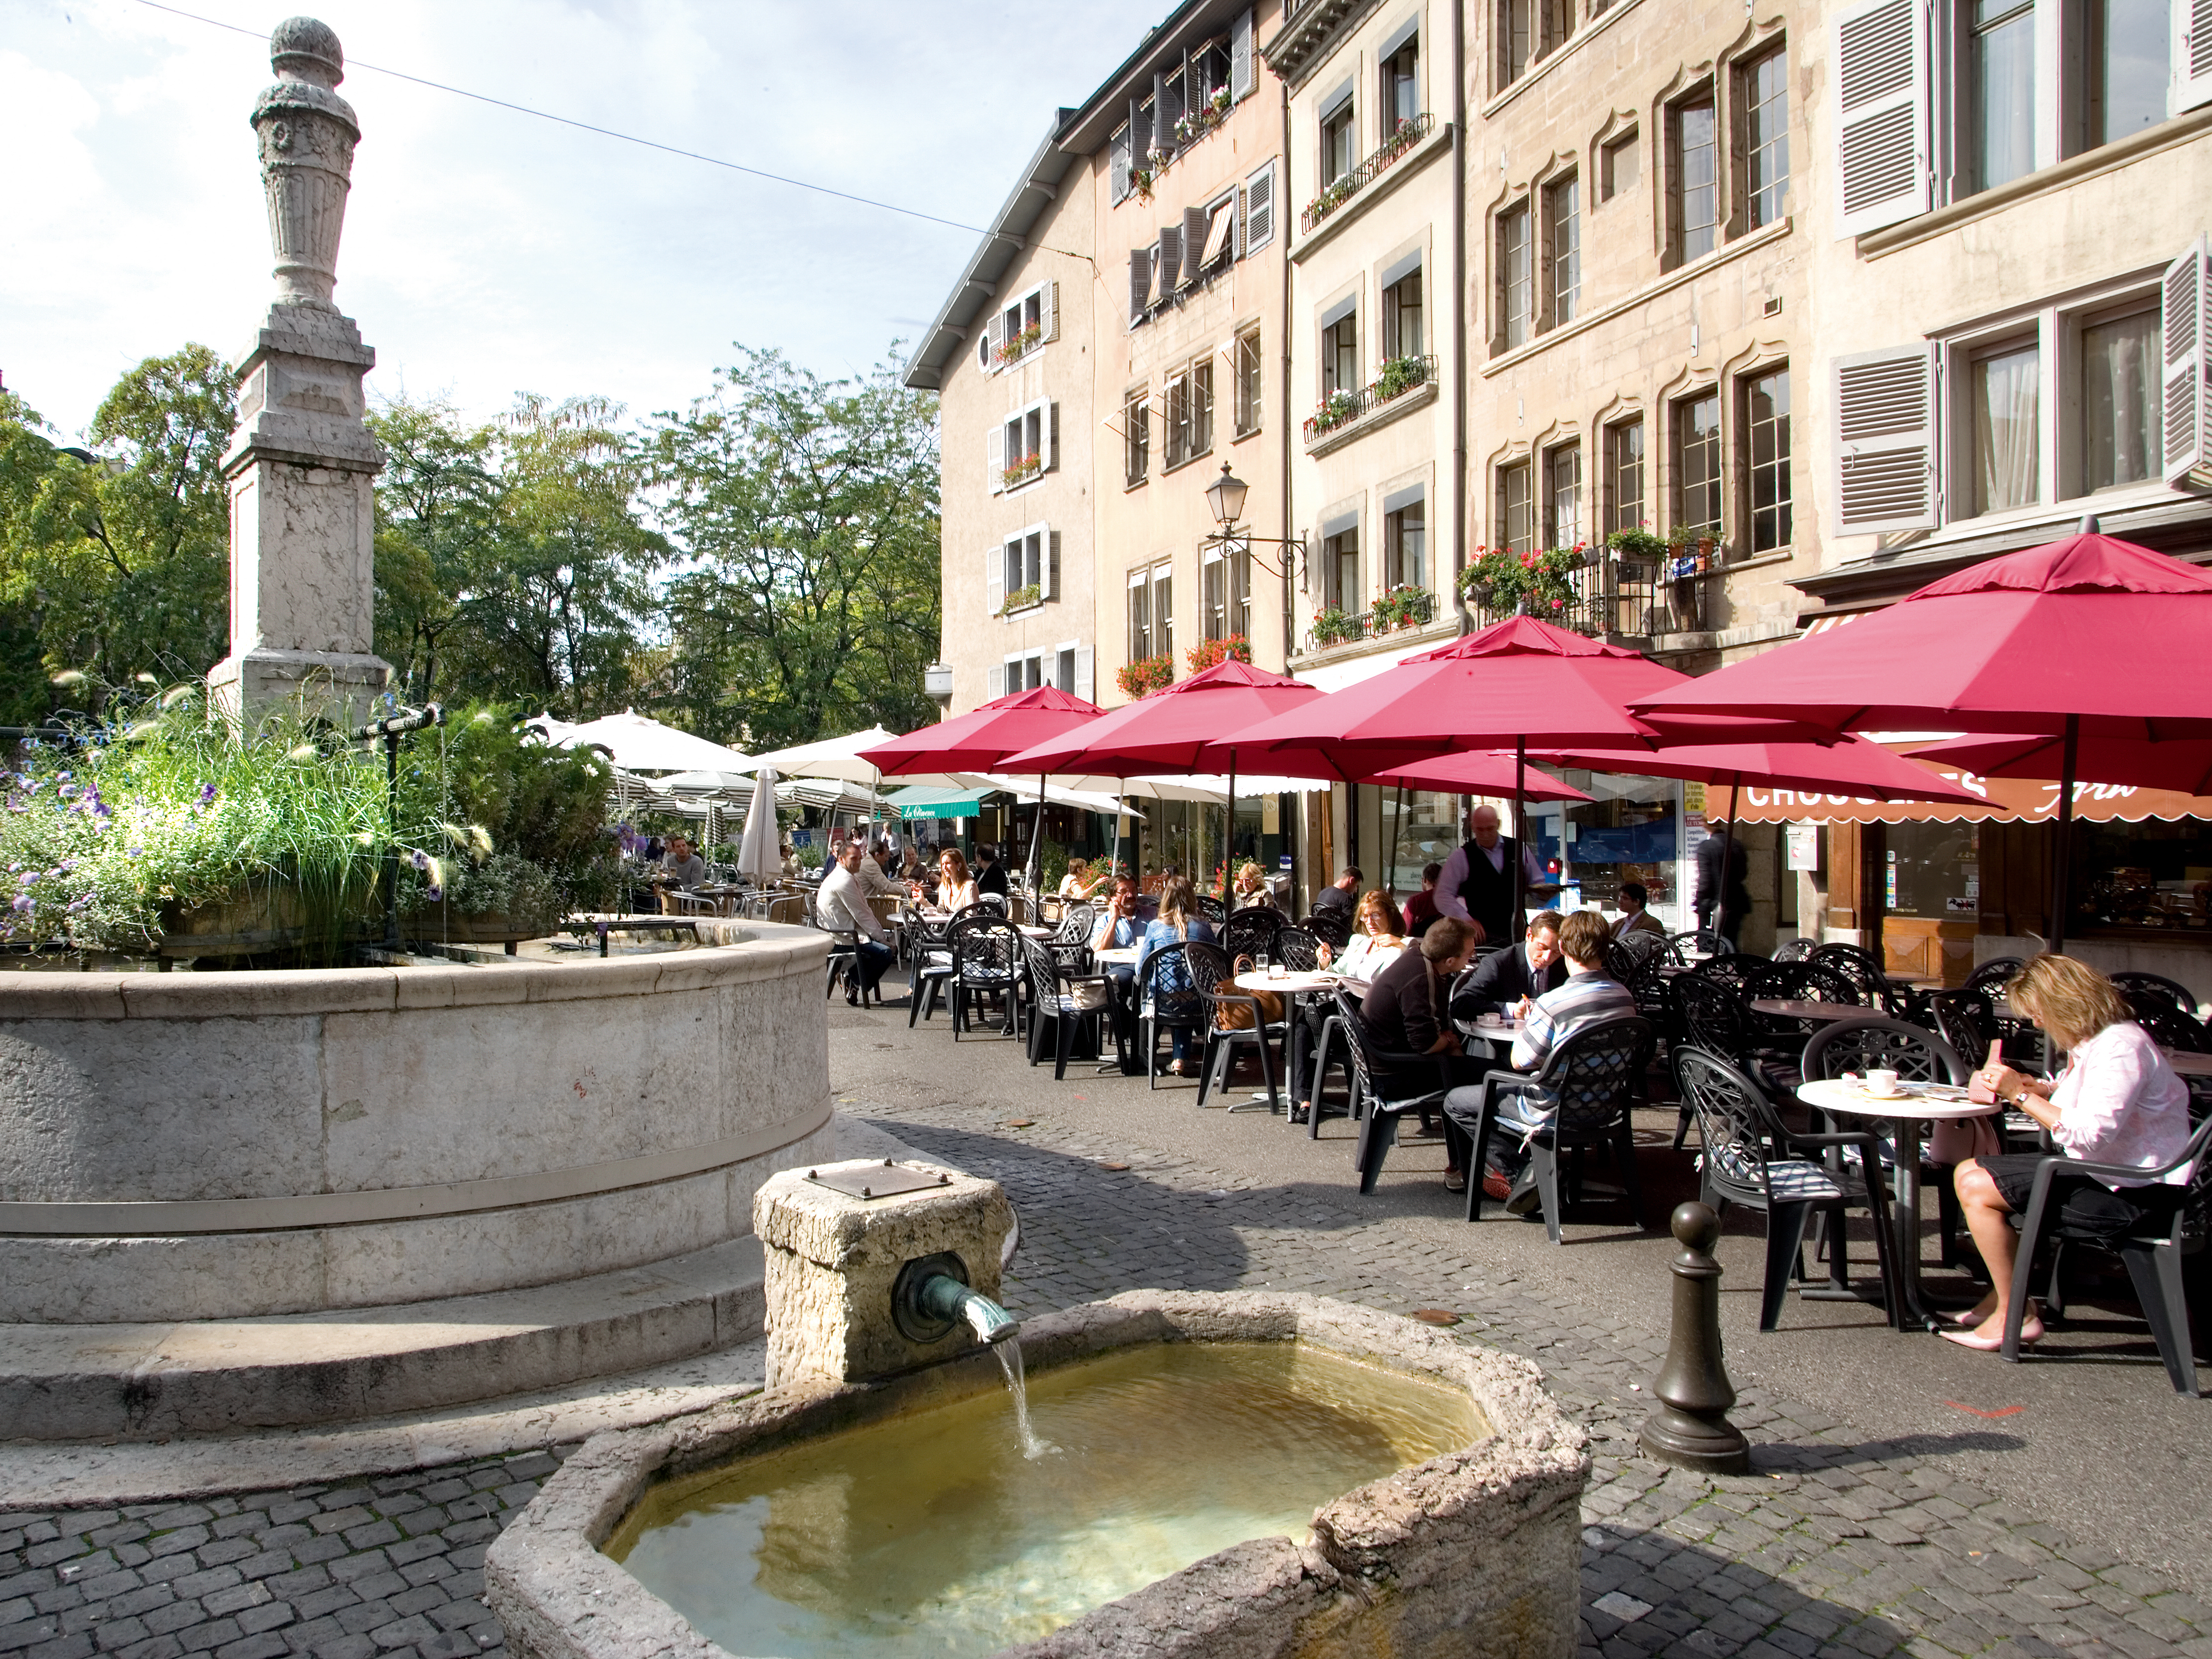 Image of the city of Old Town Geneva